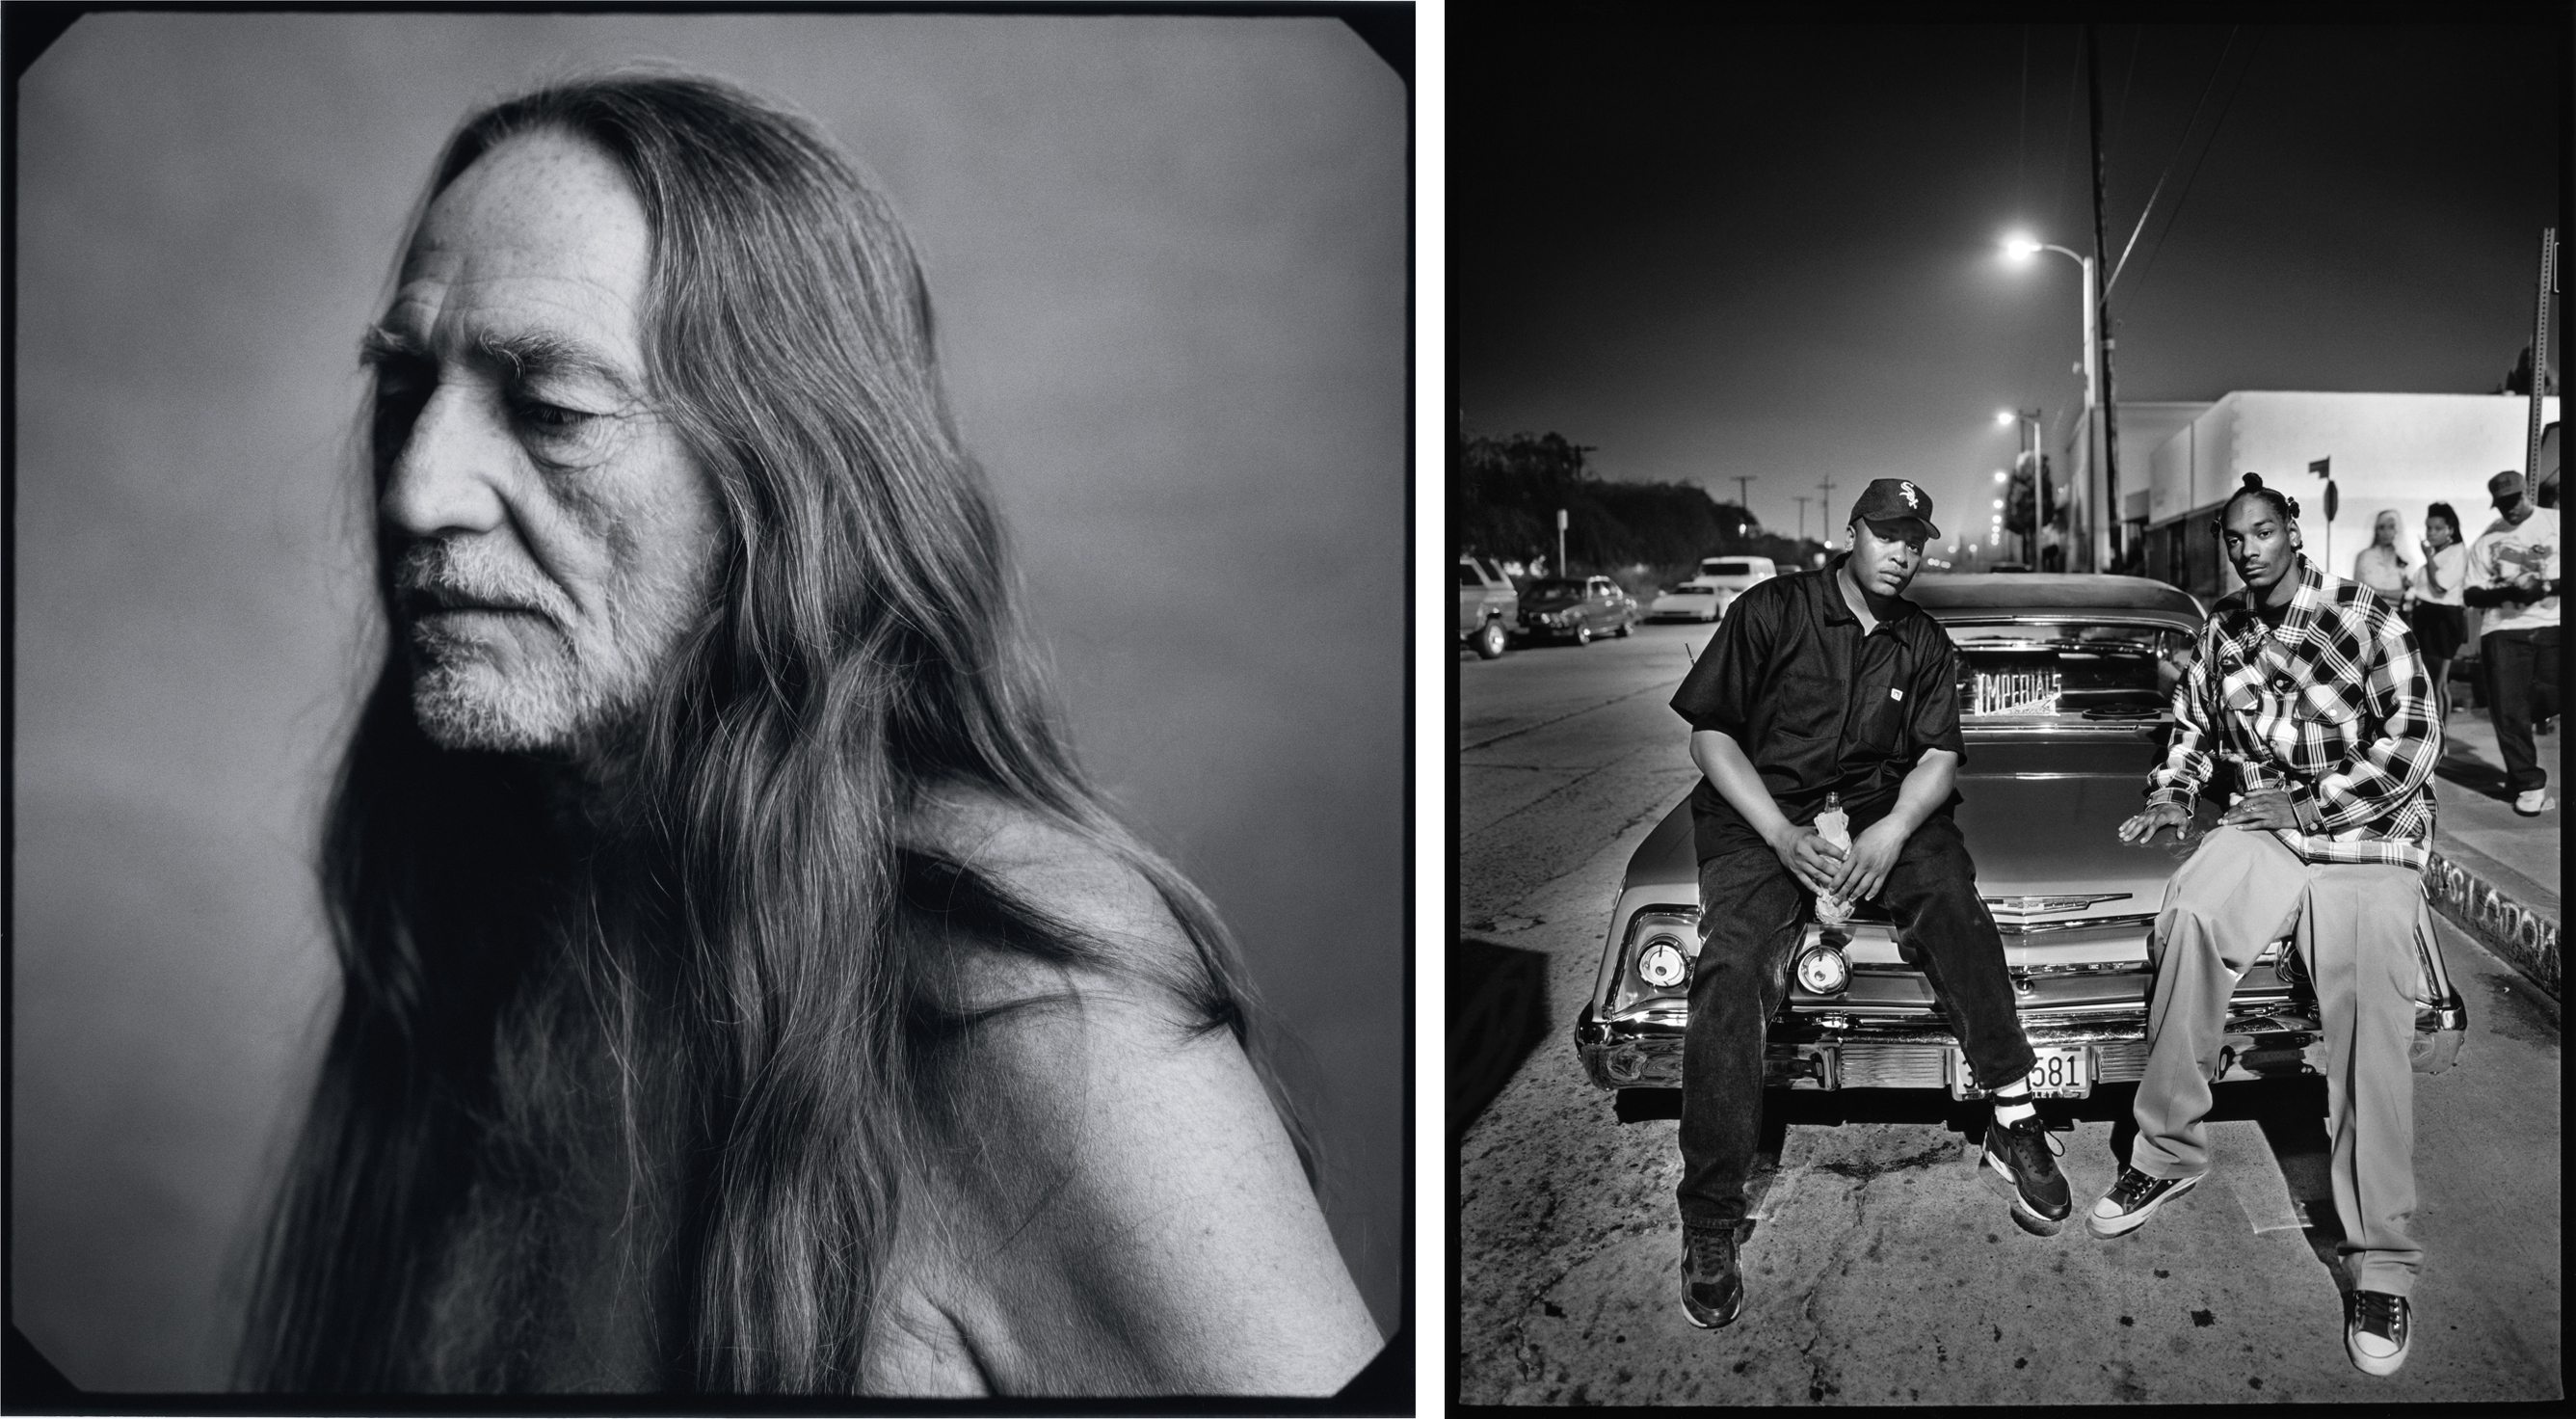 Left: Willie Nelson, New York, NY, 1996. Right: Dr. Dre and Snoop Dogg, Los Angeles, CA photograph by Mark Seliger